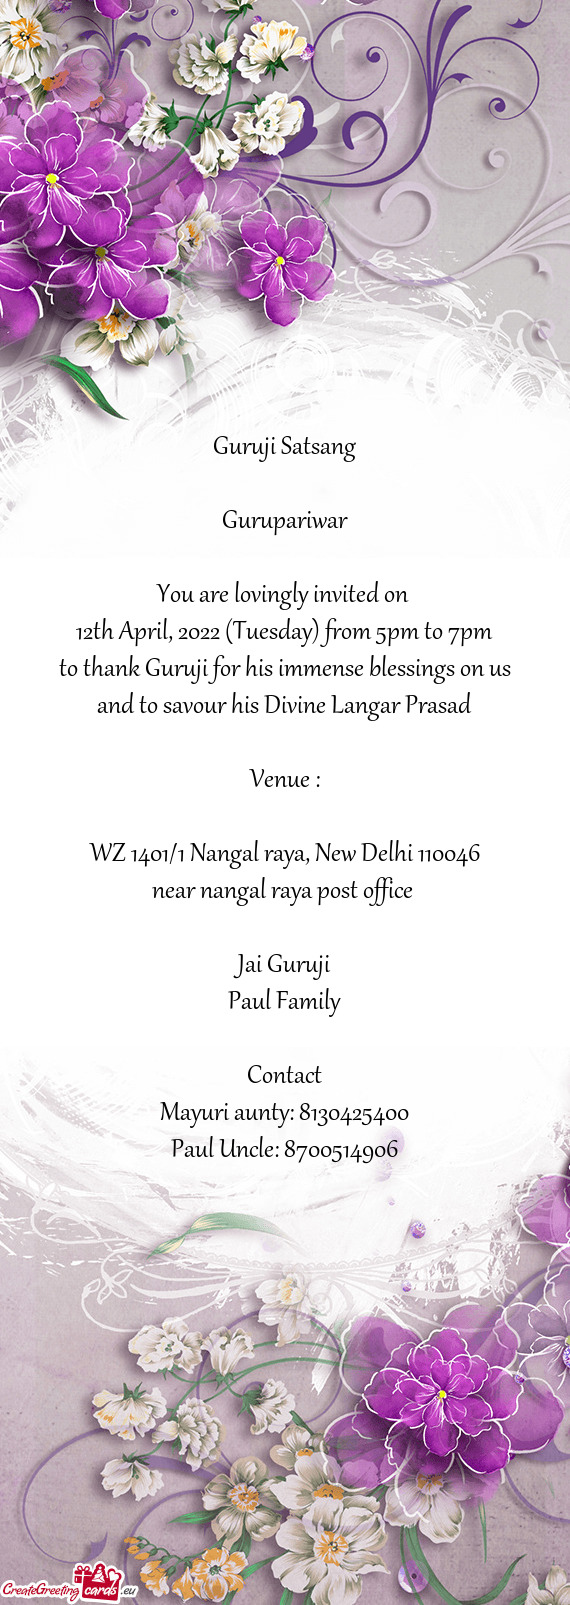 12th April, 2022 (Tuesday) from 5pm to 7pm